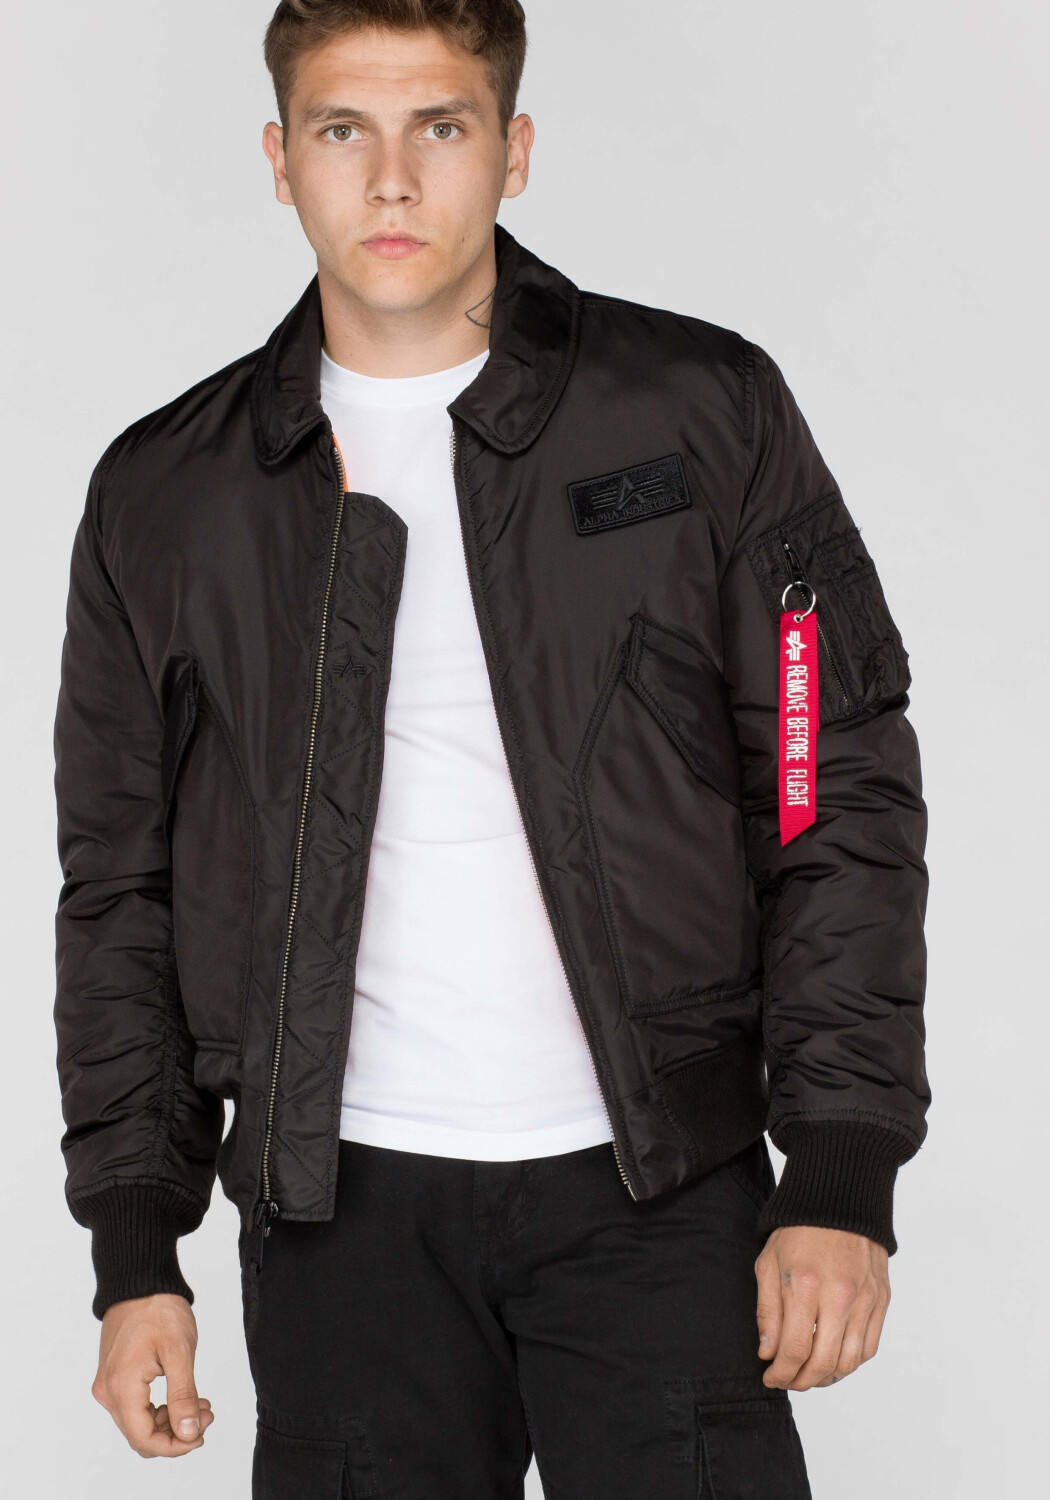 Buy Alpha Industries CWU 45 black from £128.99 (Today) – Best Deals on ...